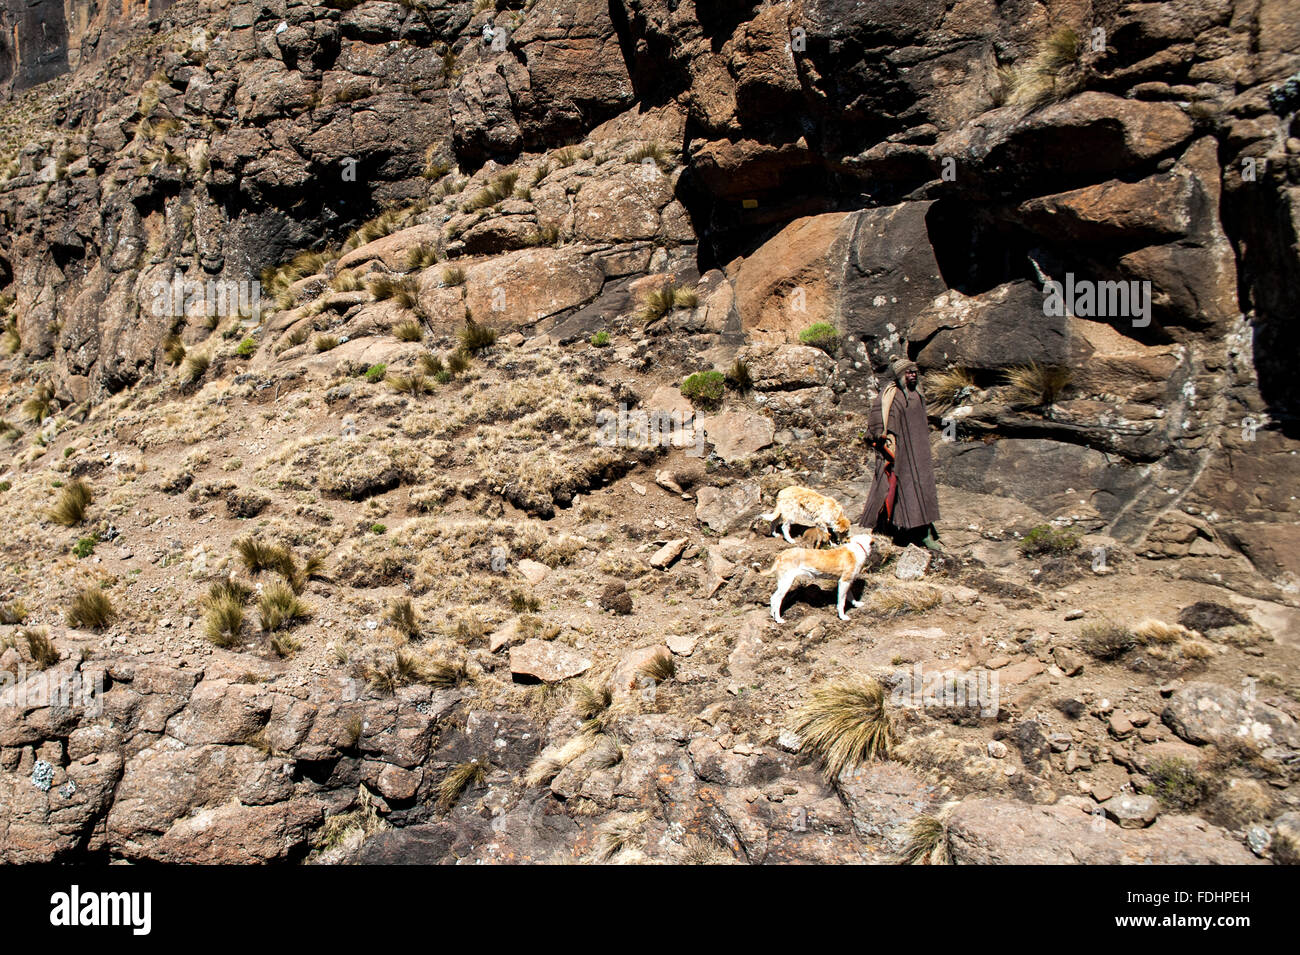 Local shepherd and his dogs standing on rocky terrain in Lesotho, Africa Stock Photo